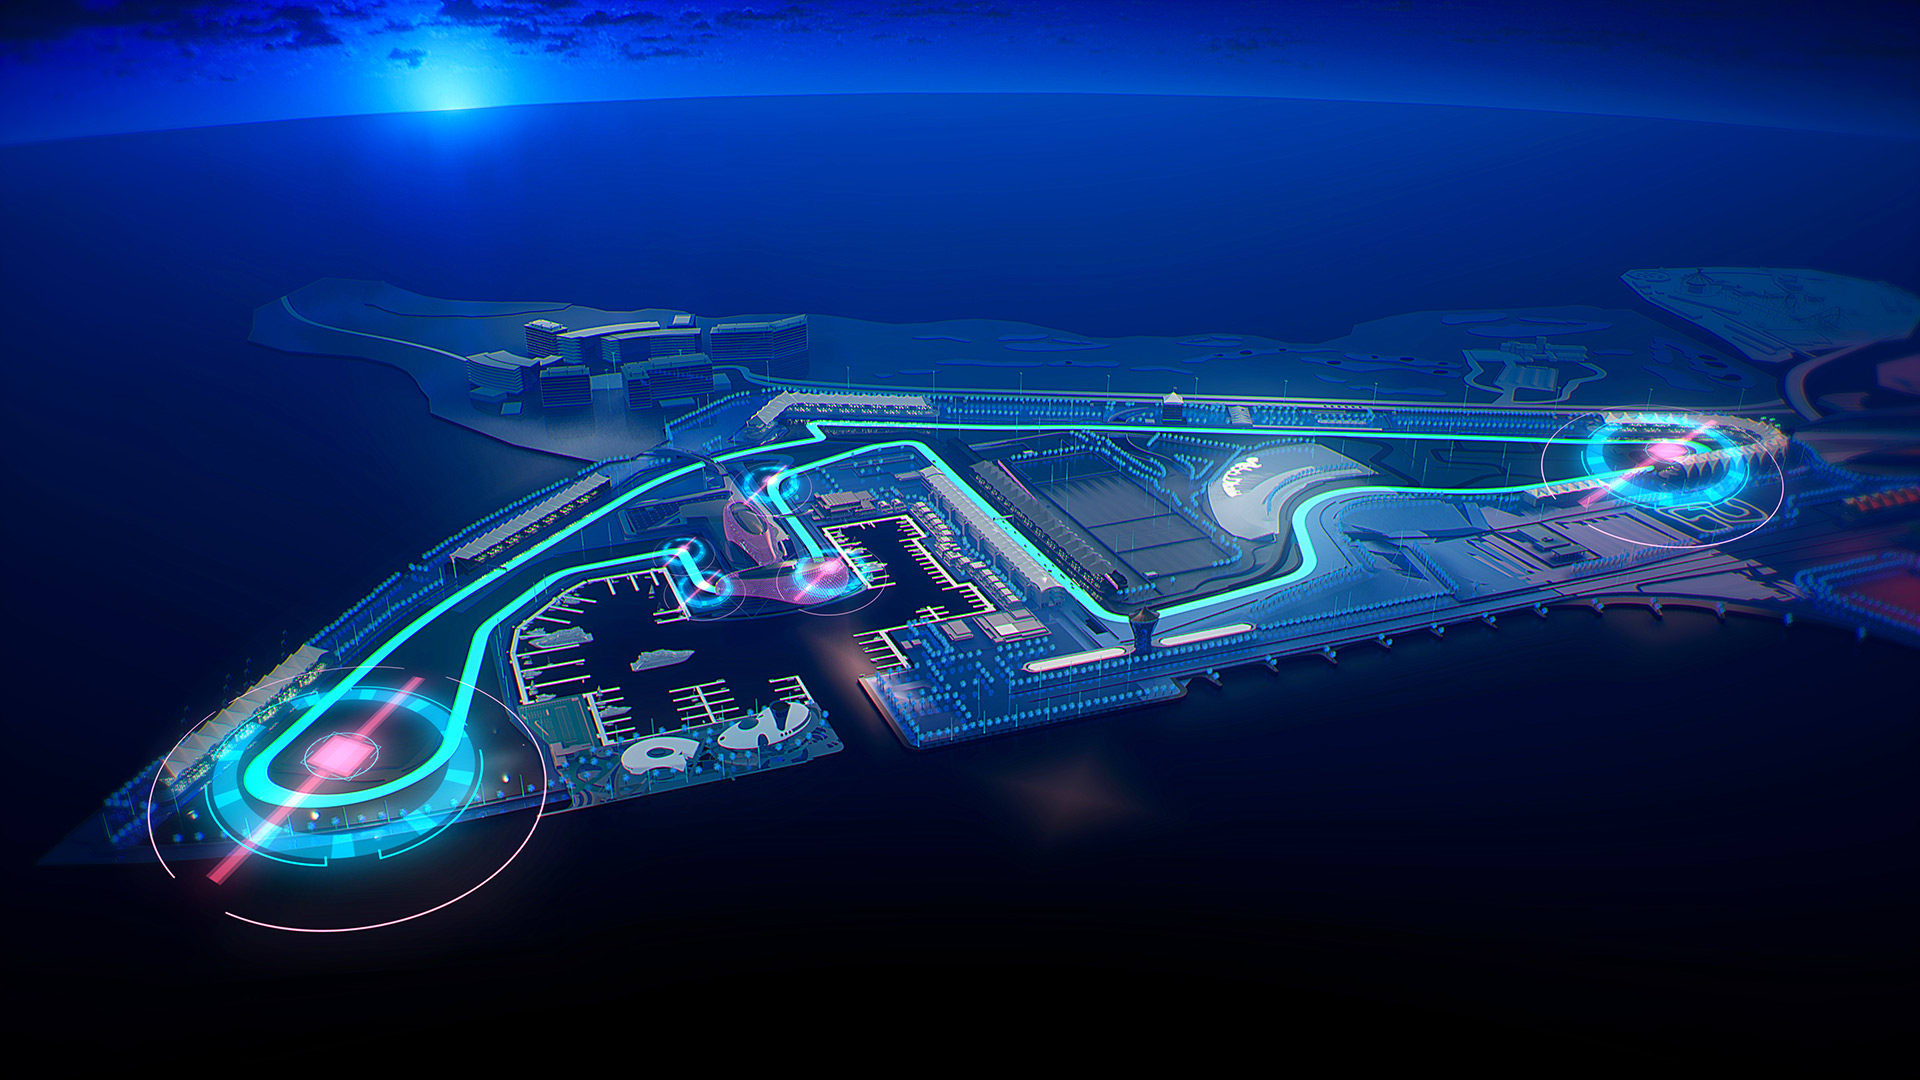 REVEALED The track changes aimed at improving overtaking at Abu Dhabi